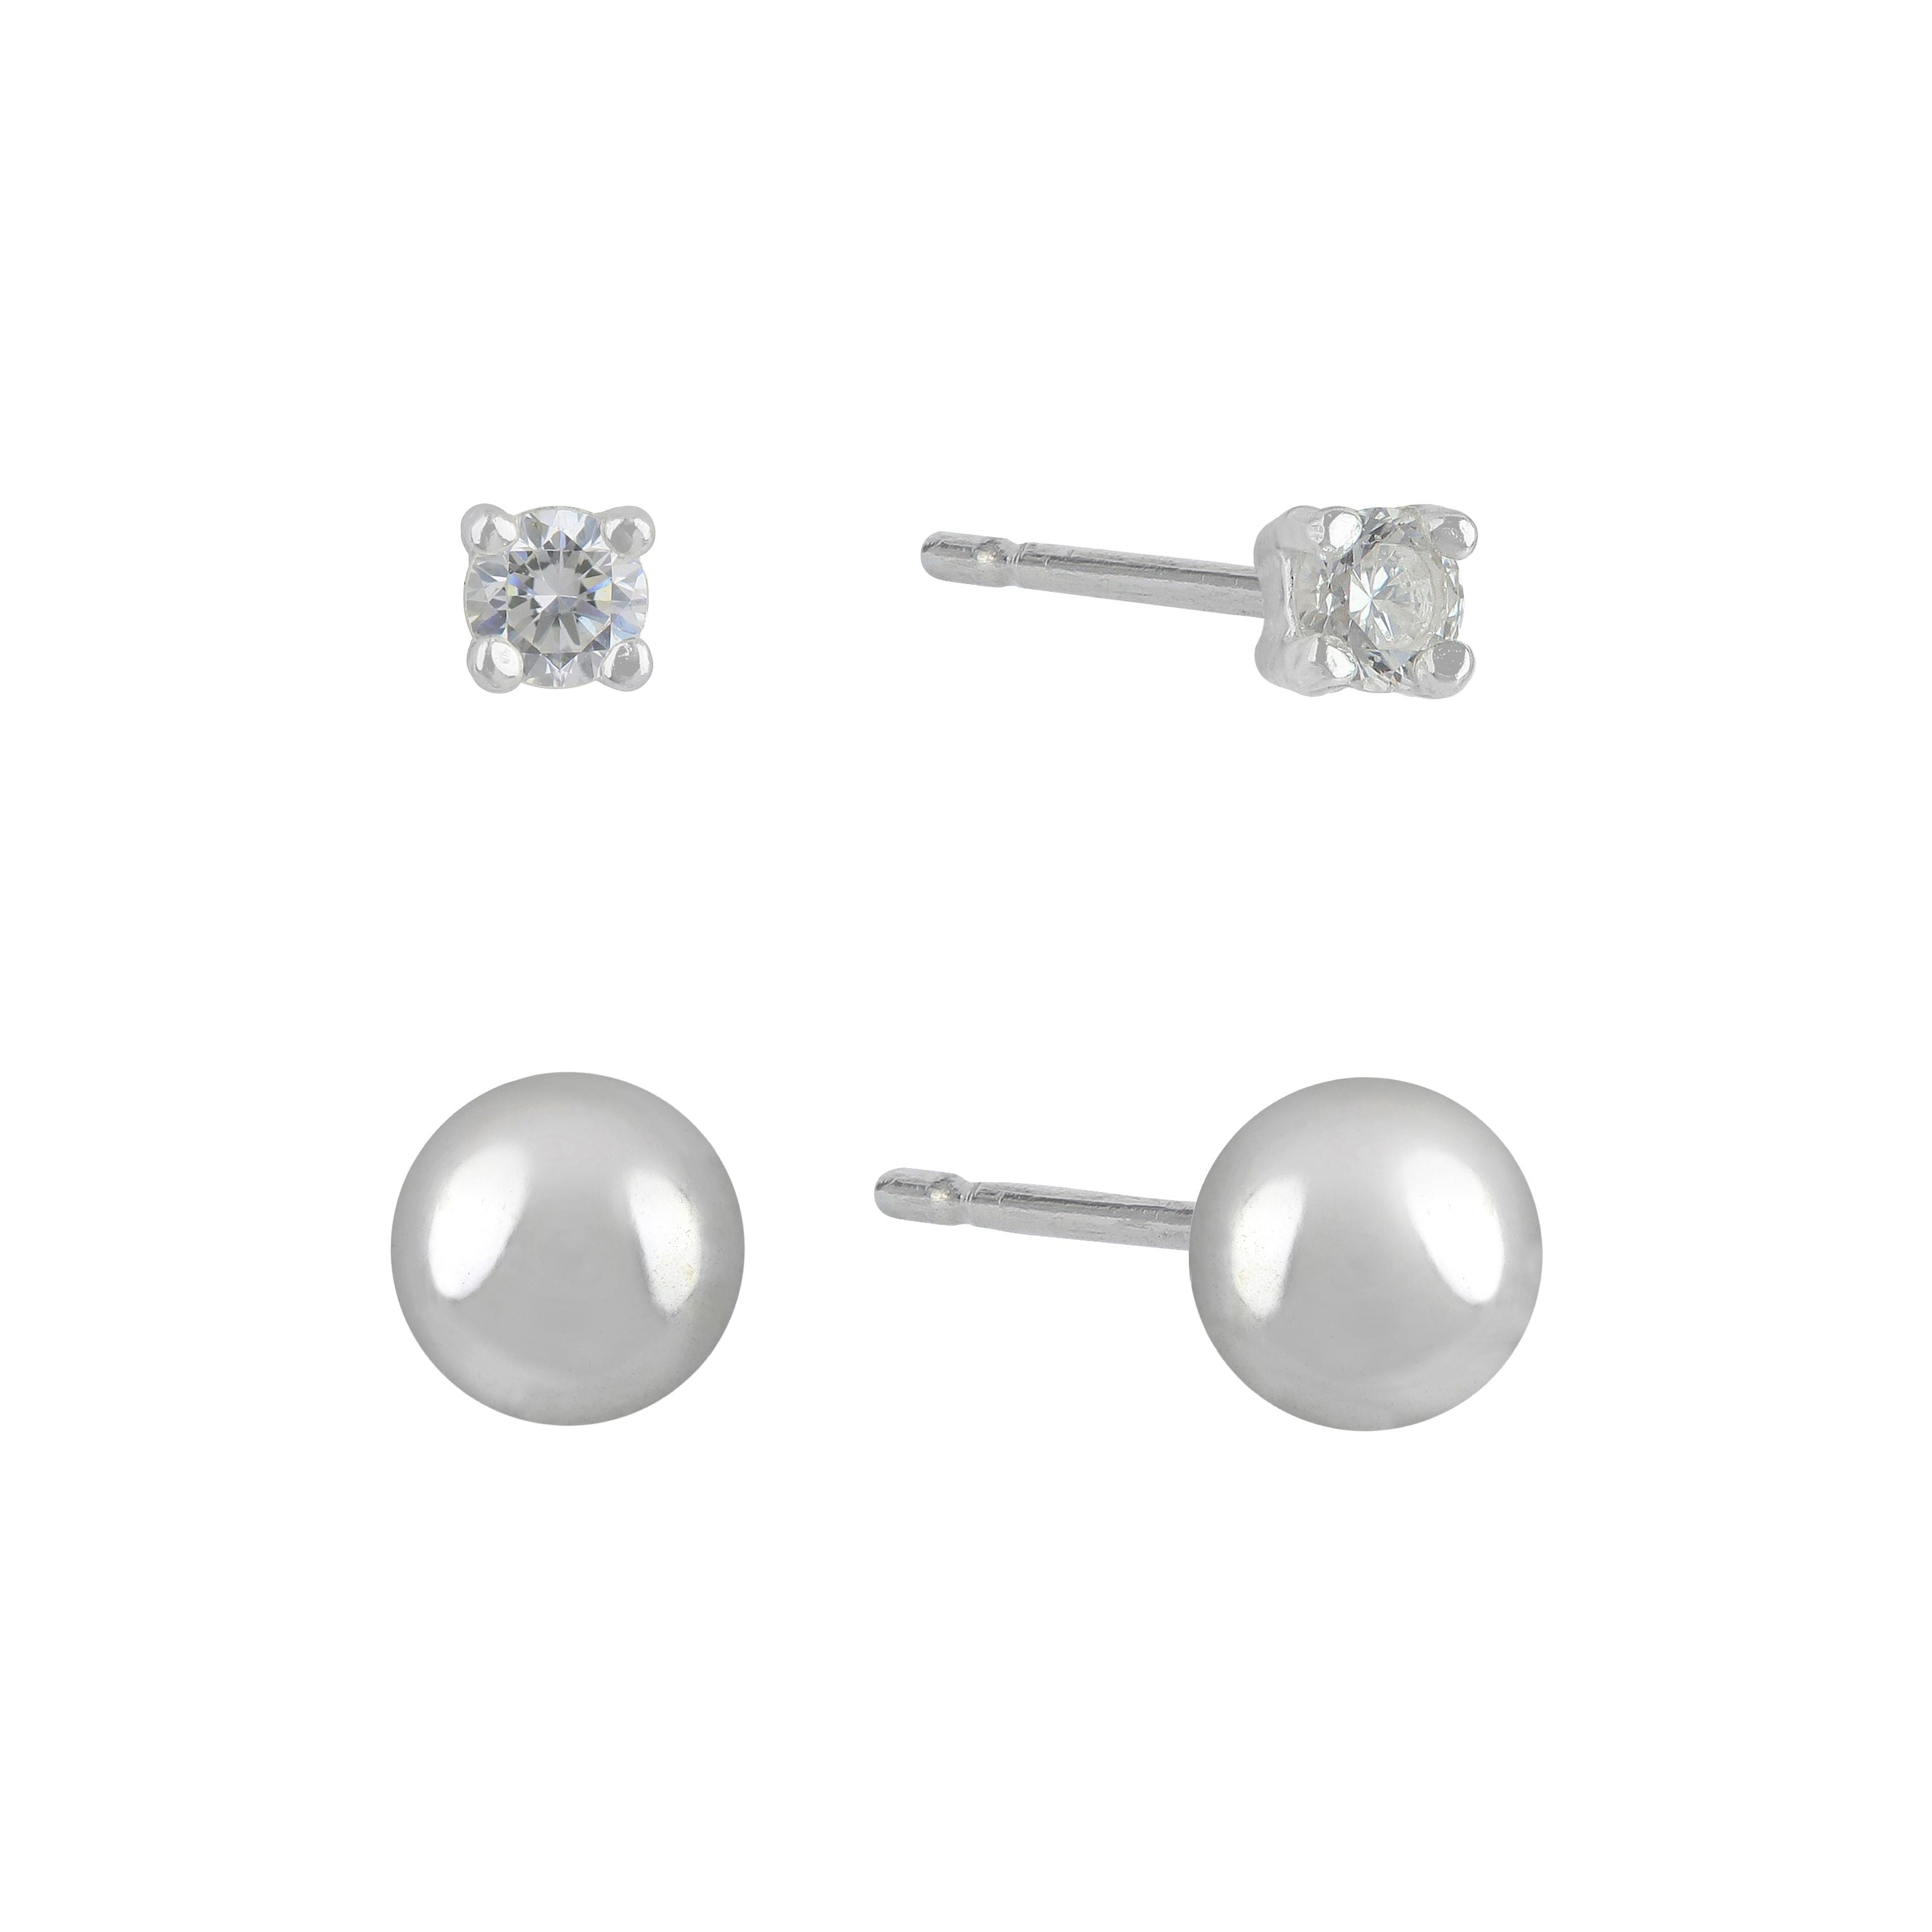 Heart Shape Micro Pave Set Studs Earrings with Secure Screw Back Closure 925 Sterling Silver Round Cut Diamond .05 cttw. 